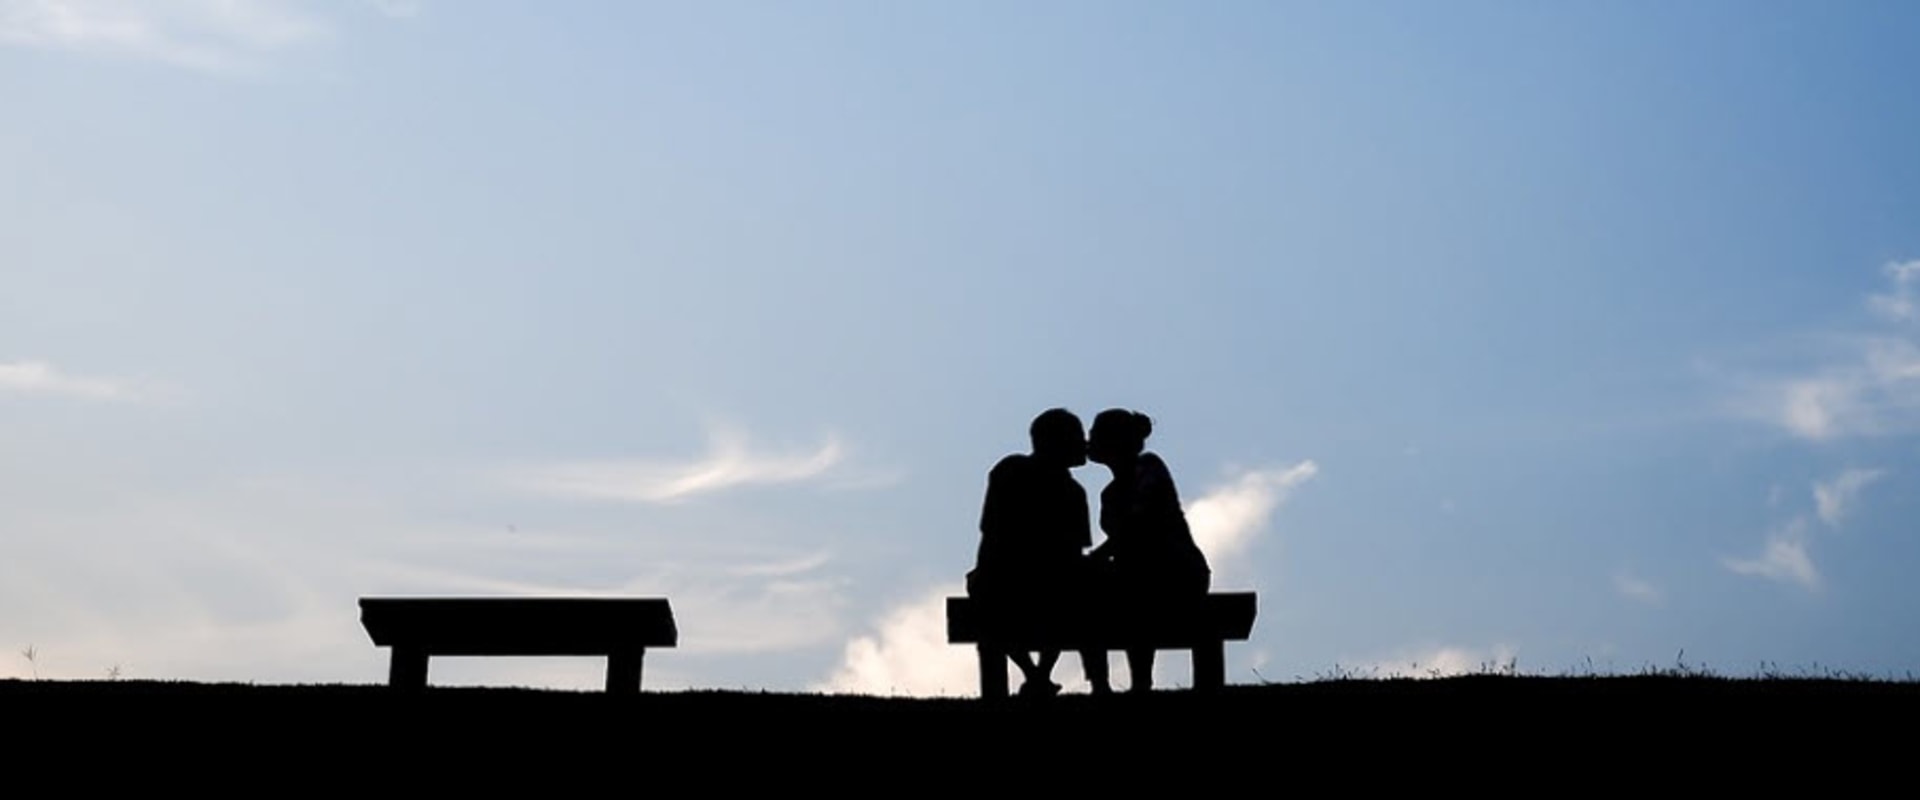 Review of the Most Popular Senior Singles Dating Sites